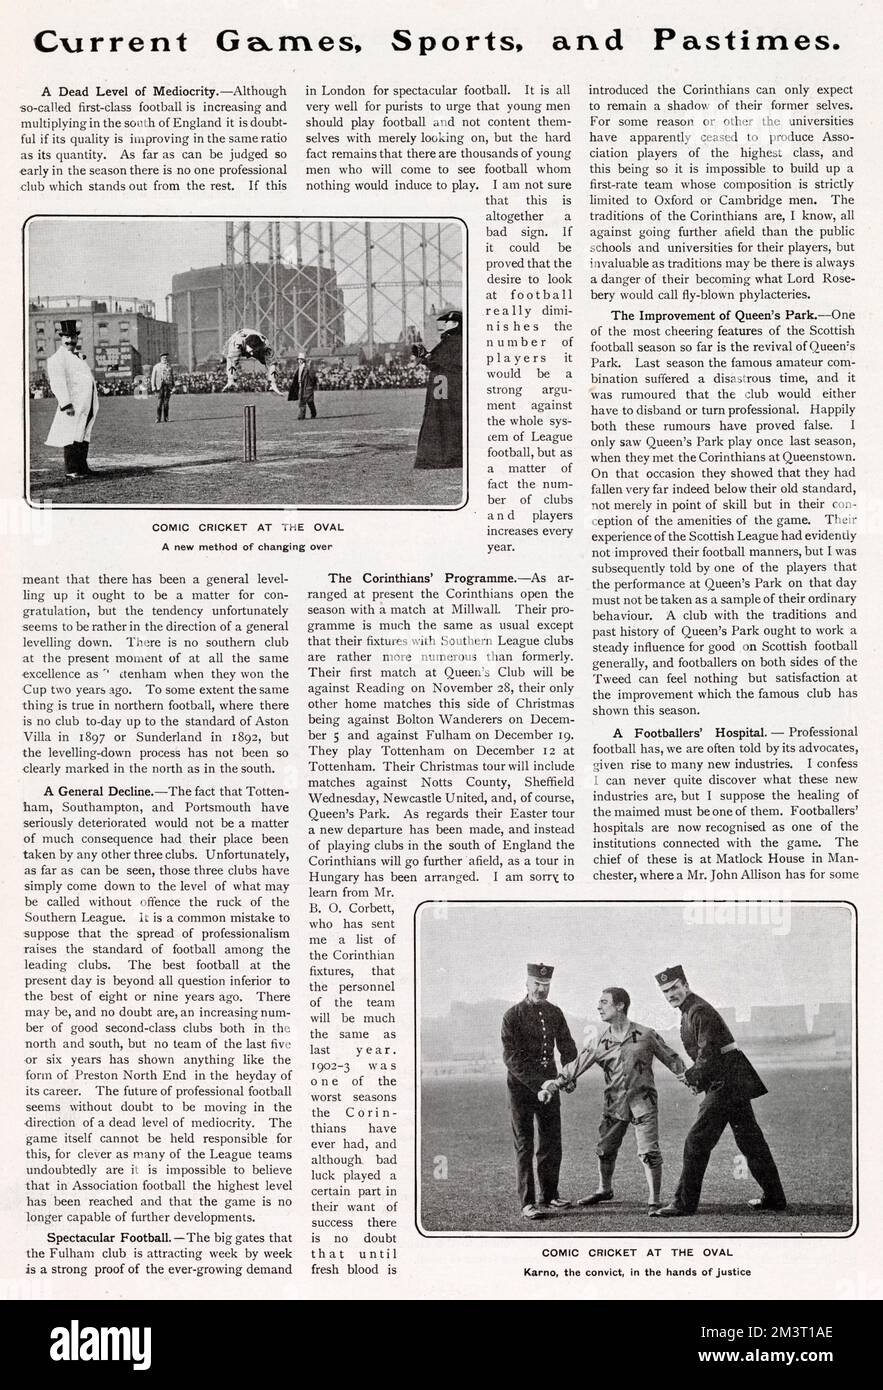 Page from The Tatler reporting on a comedy cricket match which took place at the Oval. Bottom right image shows Fred Karno, music hall star, being led away wearing a convict's costume as well as vaulting over the wicket. Stock Photo